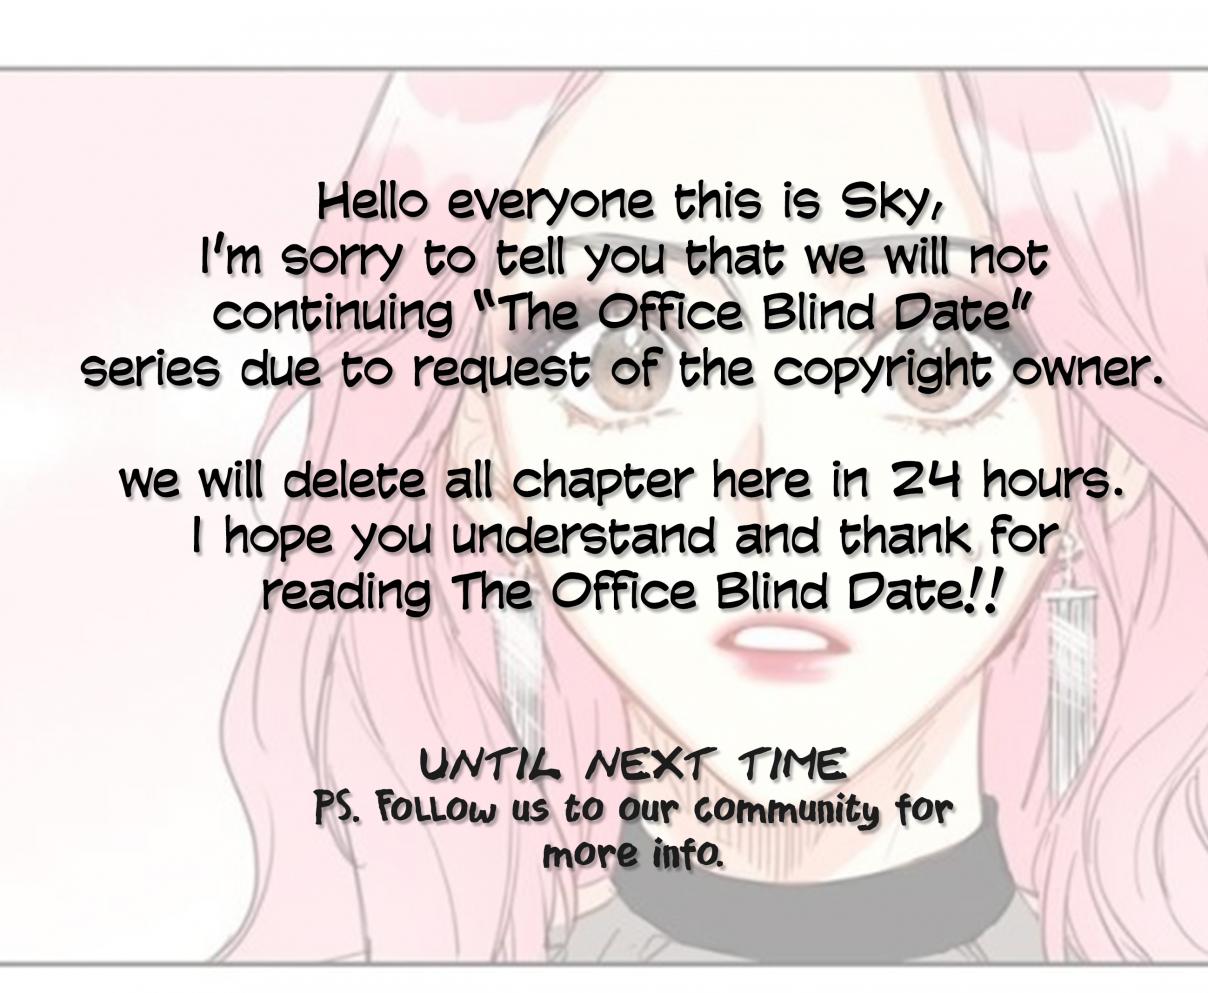 The Office Blind Date Ch. 14 Announcement